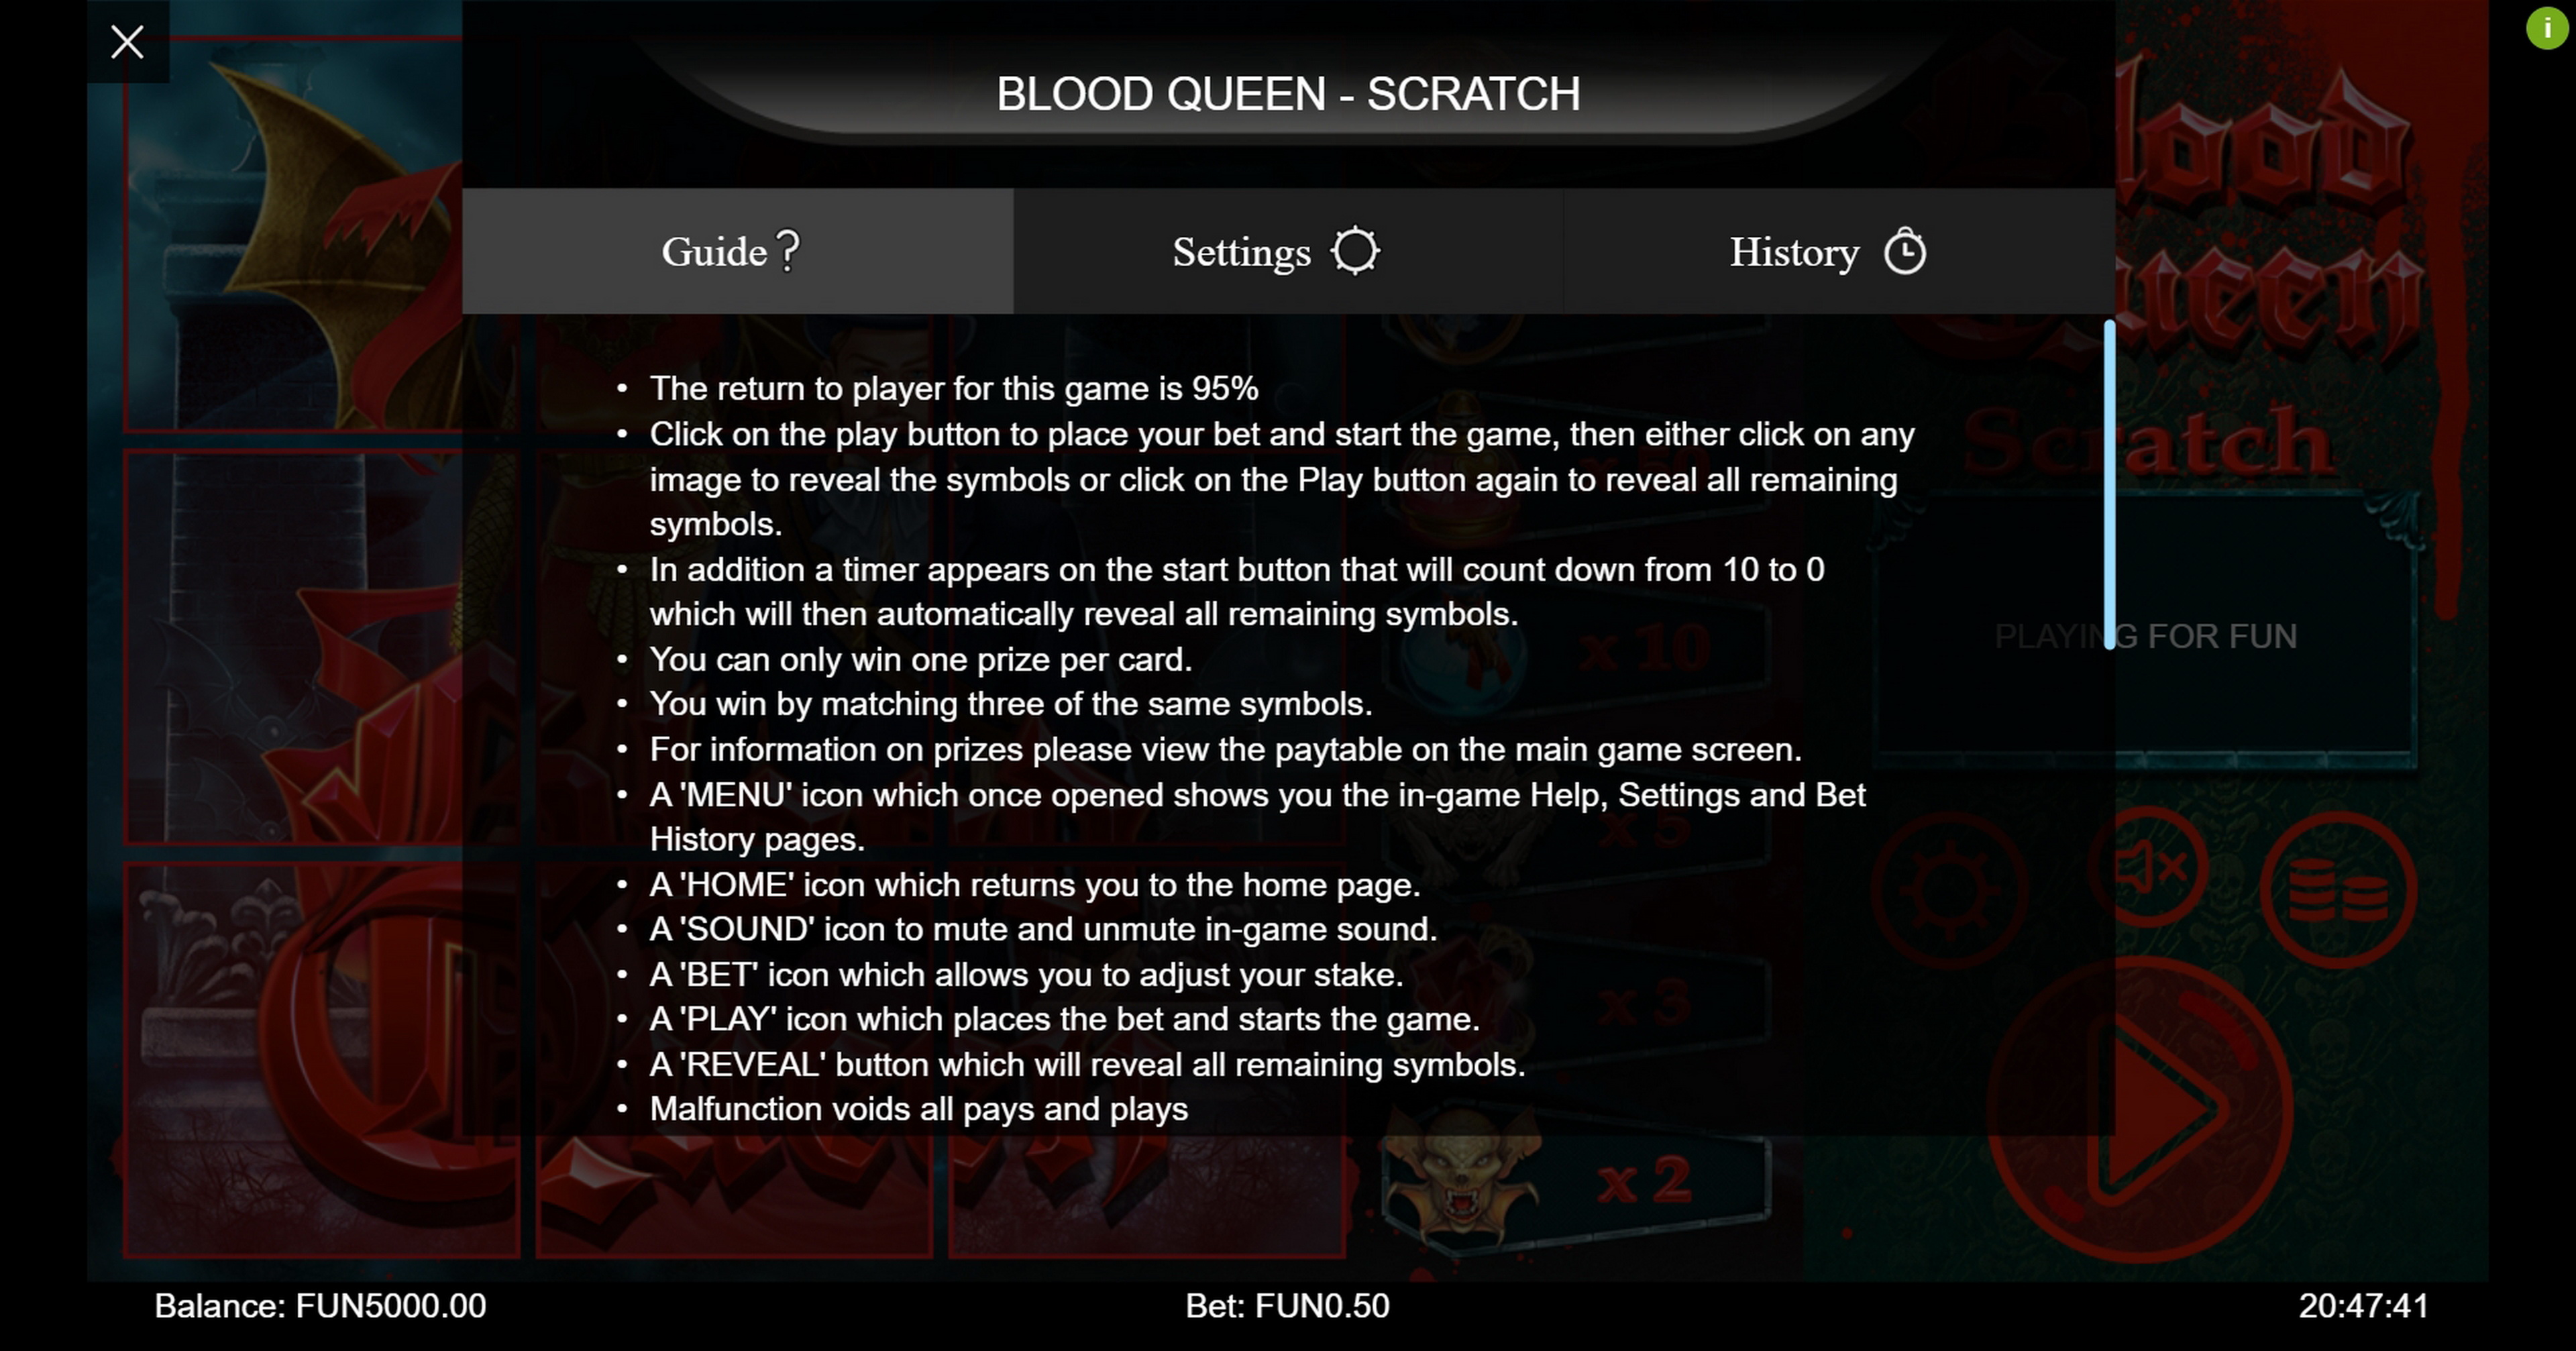 Info of Blood Queen Scratch Slot Game by Iron Dog Studios